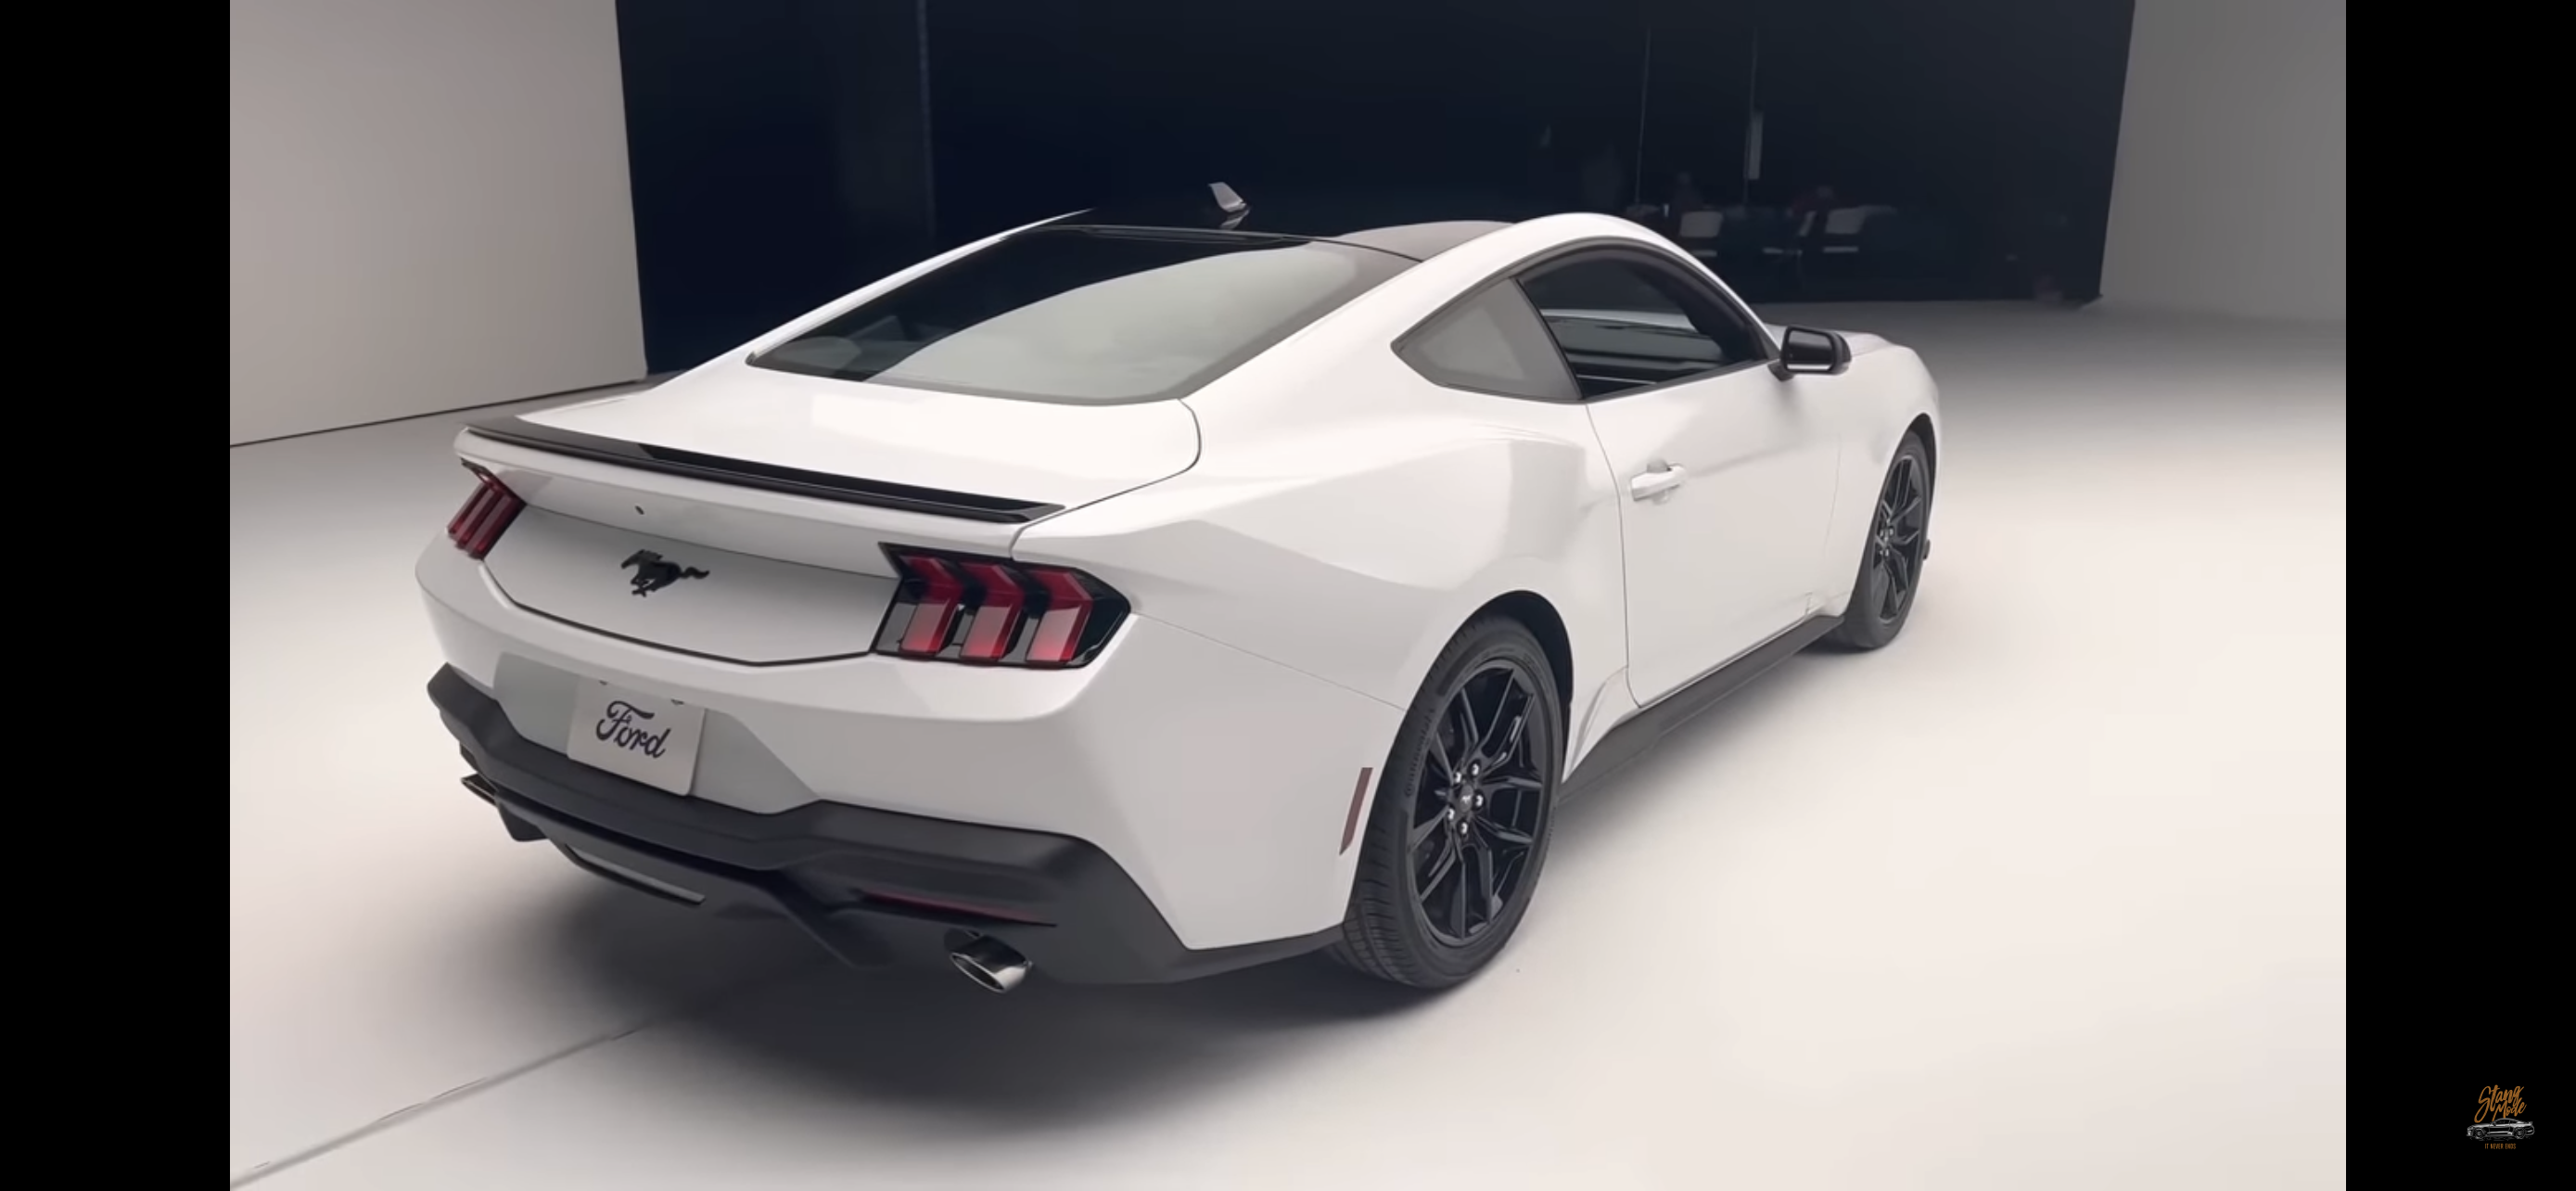 S650 Mustang Does anyone have a general idea what a "blade spoiler" will look like? My order sheet says blade spoiler but.... 76B48ADE-B02D-4912-AA0F-B219AB351092